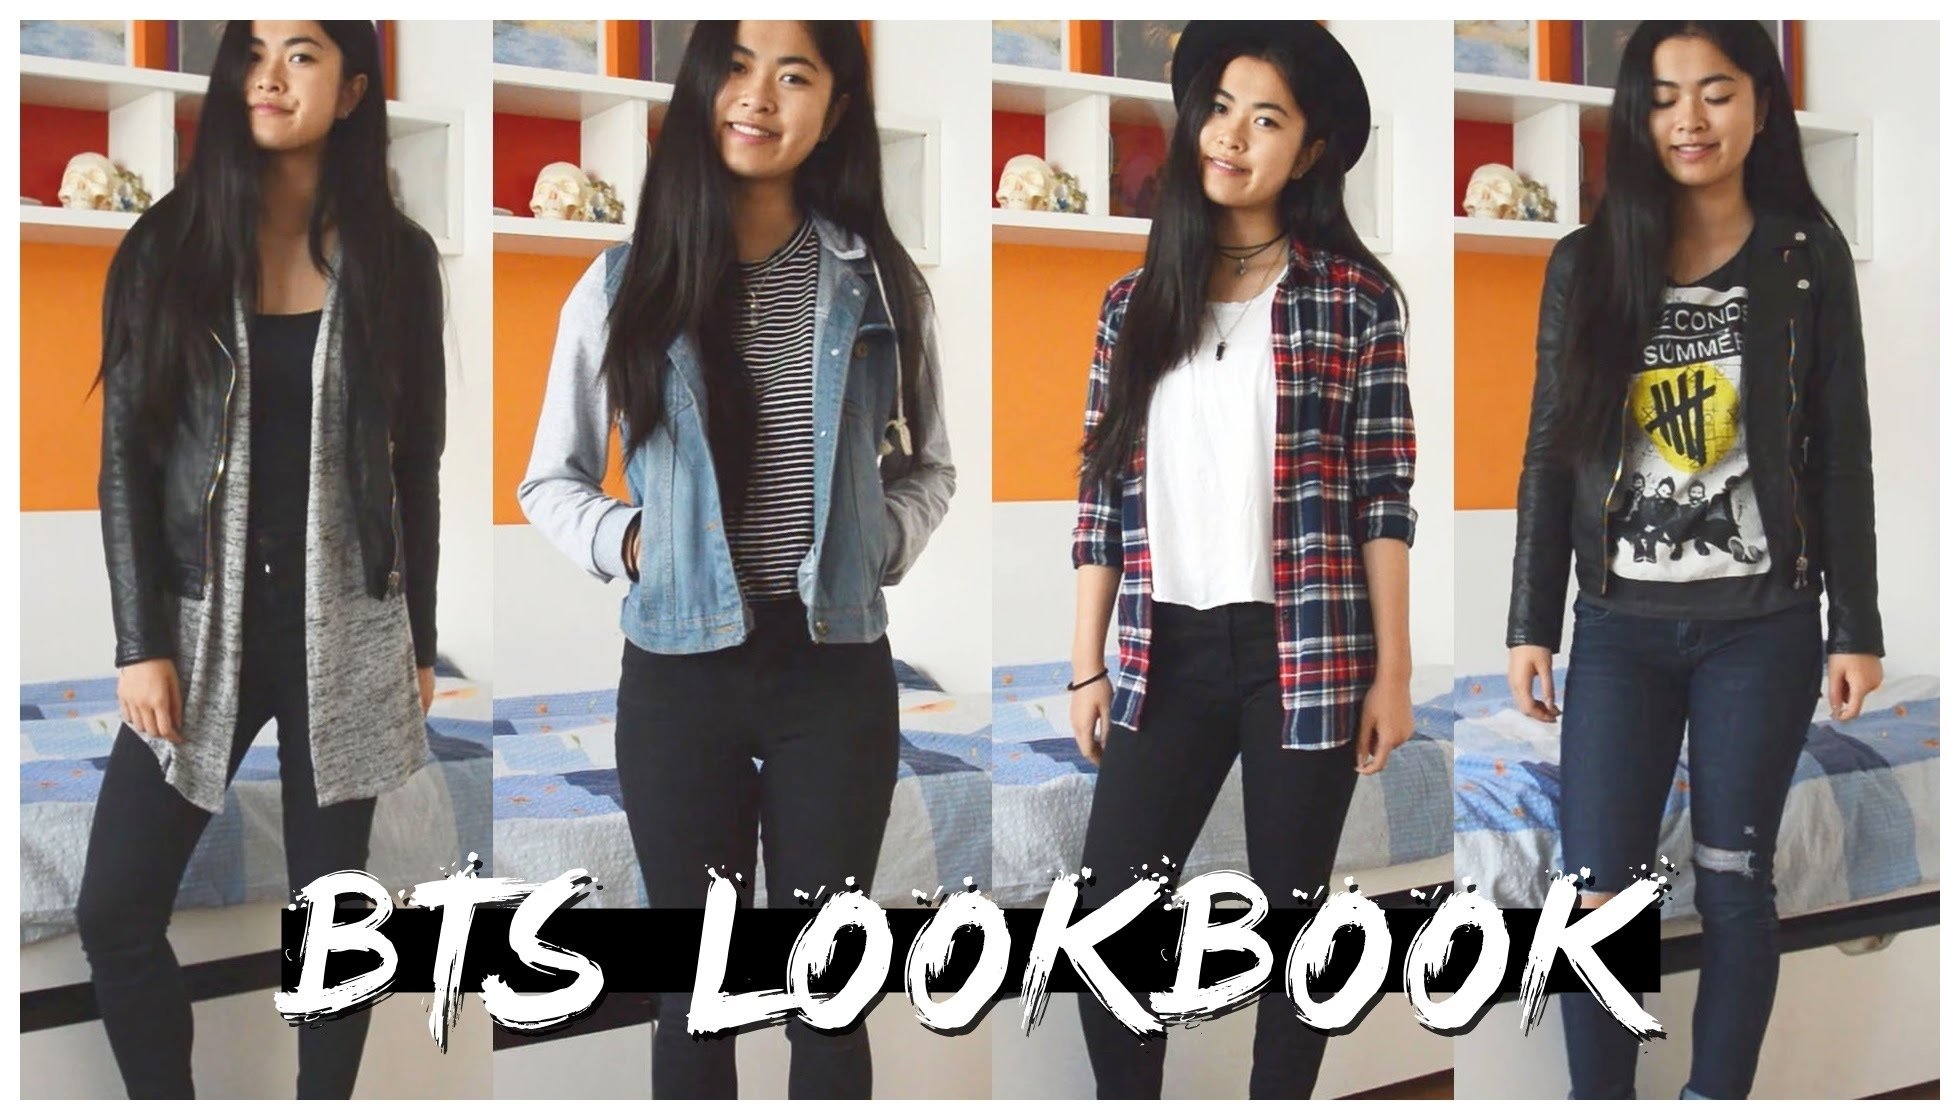 10 Most Popular Back To School Outfit Ideas For High School back to school lookbook 2015 4 outfit ideas appropriate for high 2022